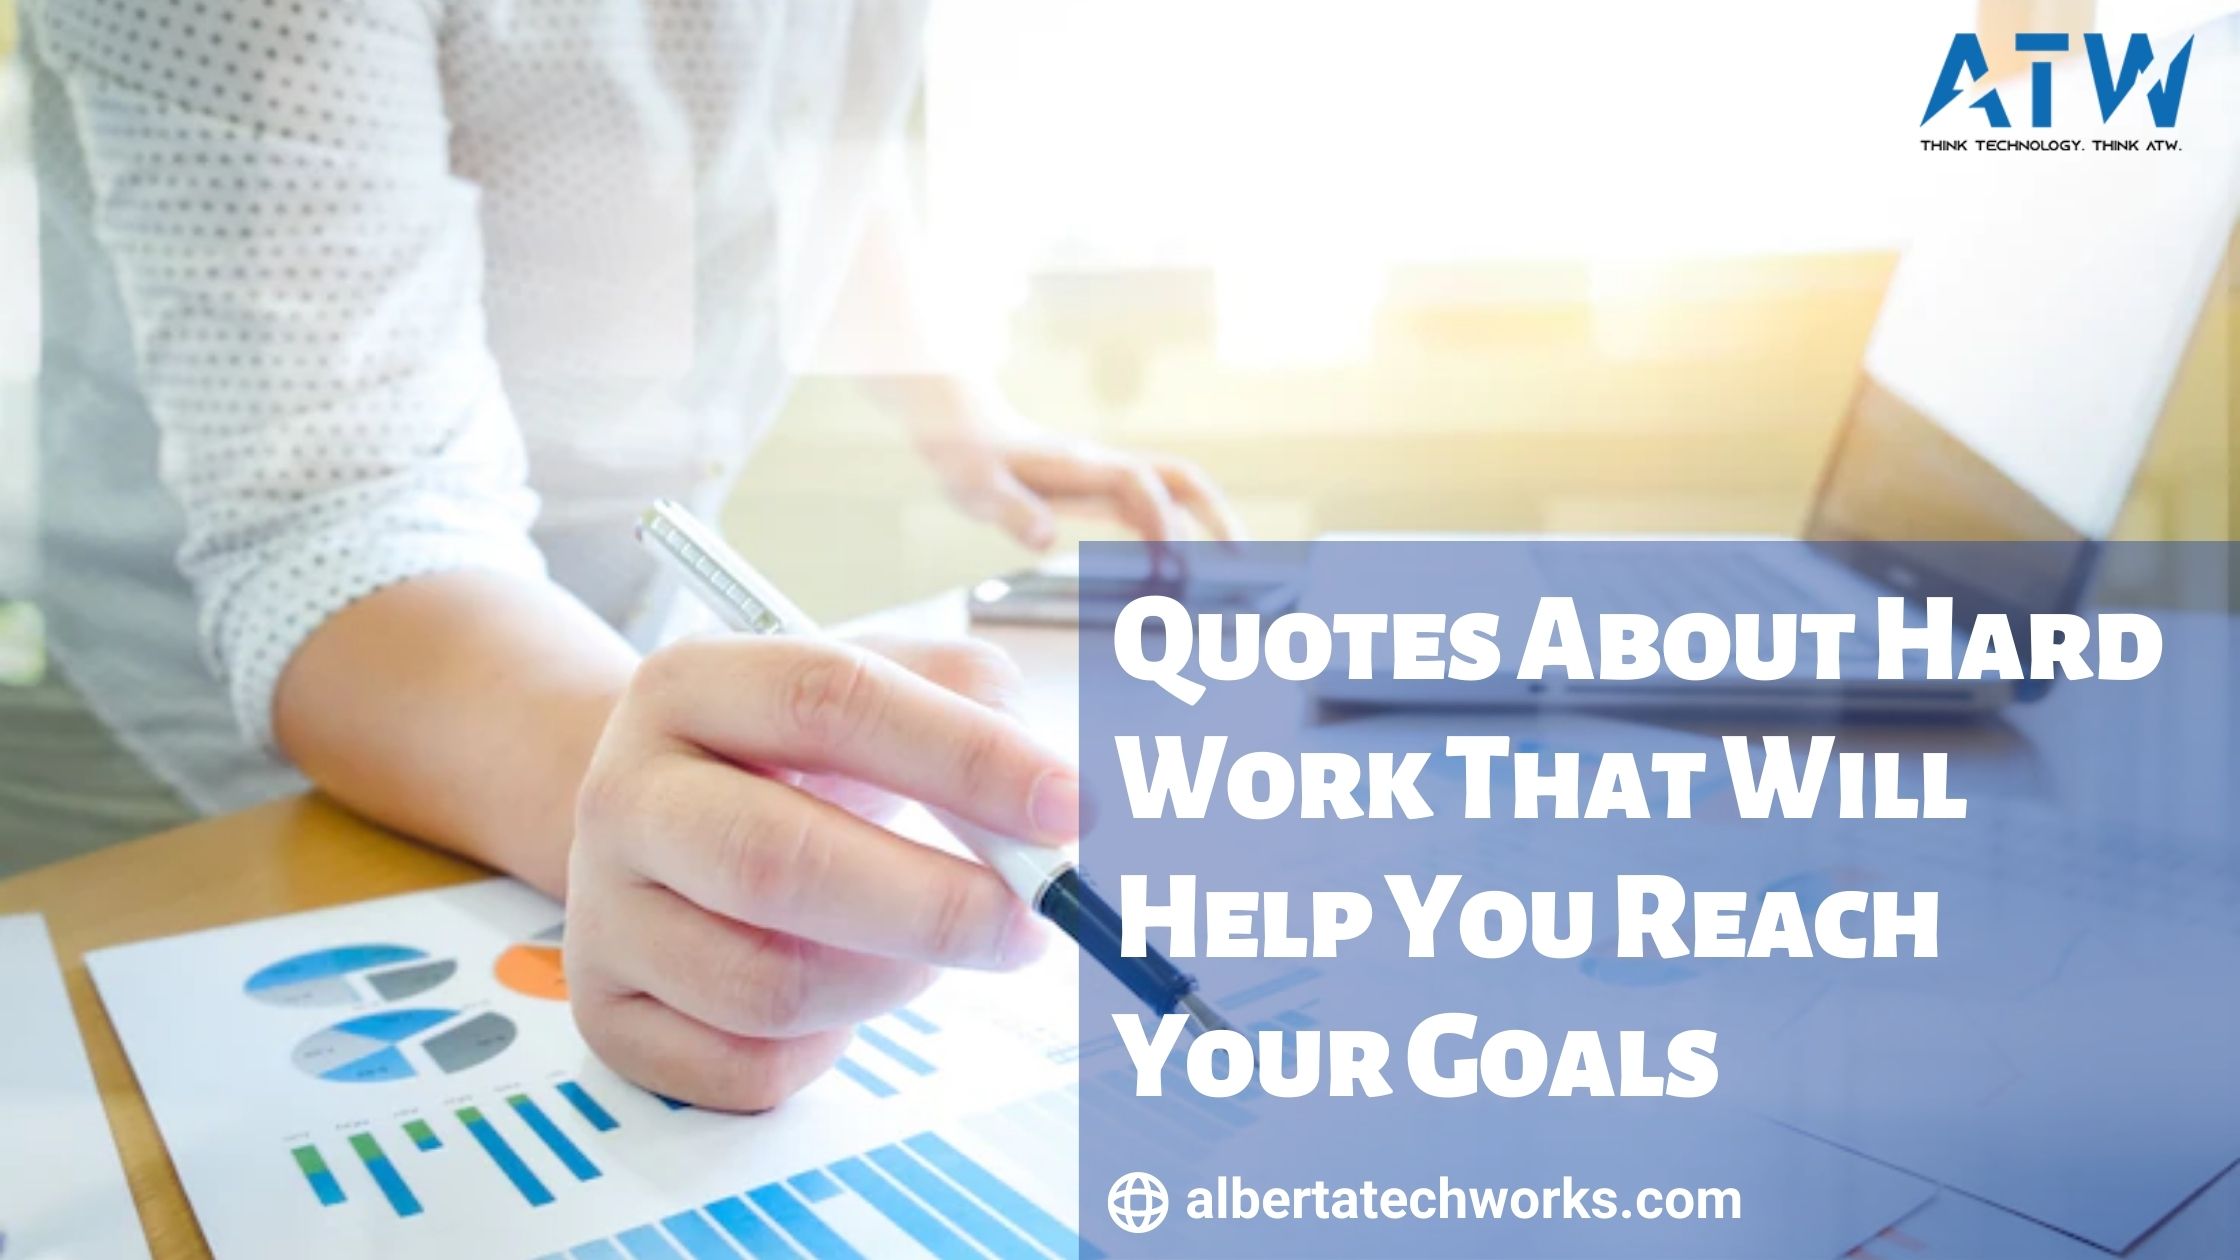 Quotes About Hard Work That Will Help You Reach Your Goals